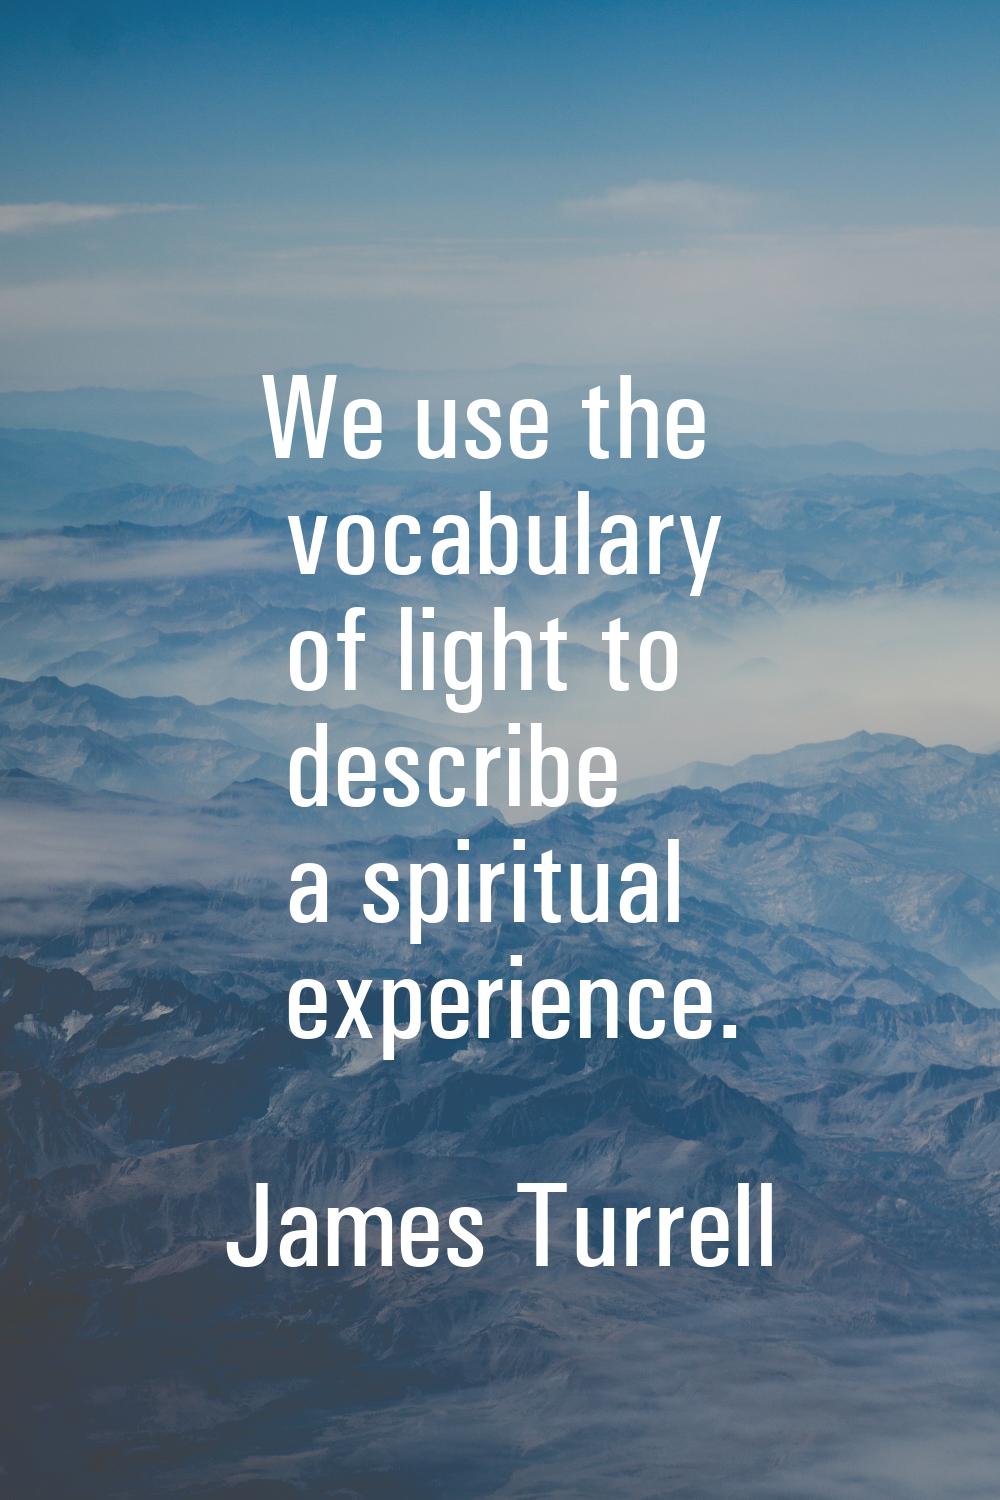 We use the vocabulary of light to describe a spiritual experience.